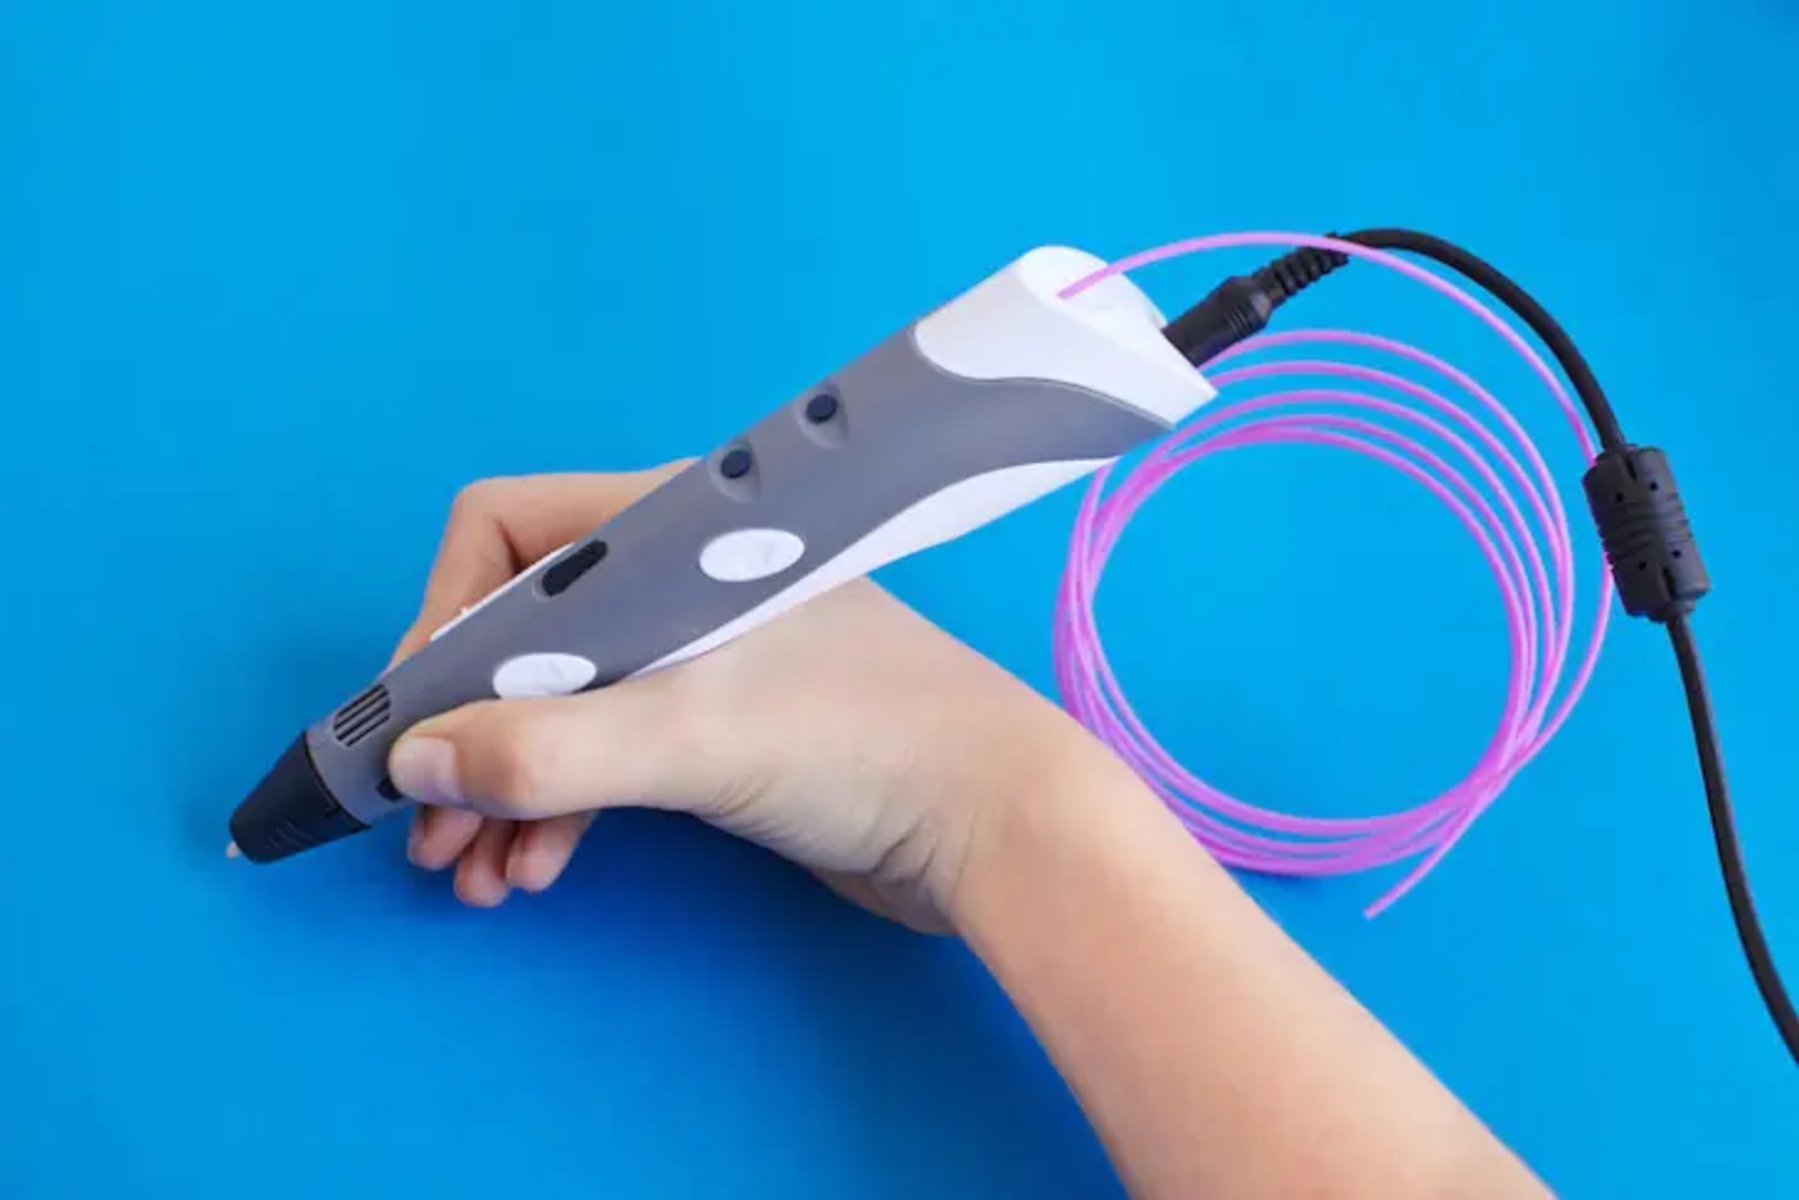 Where To Buy A 3D Printing Pen